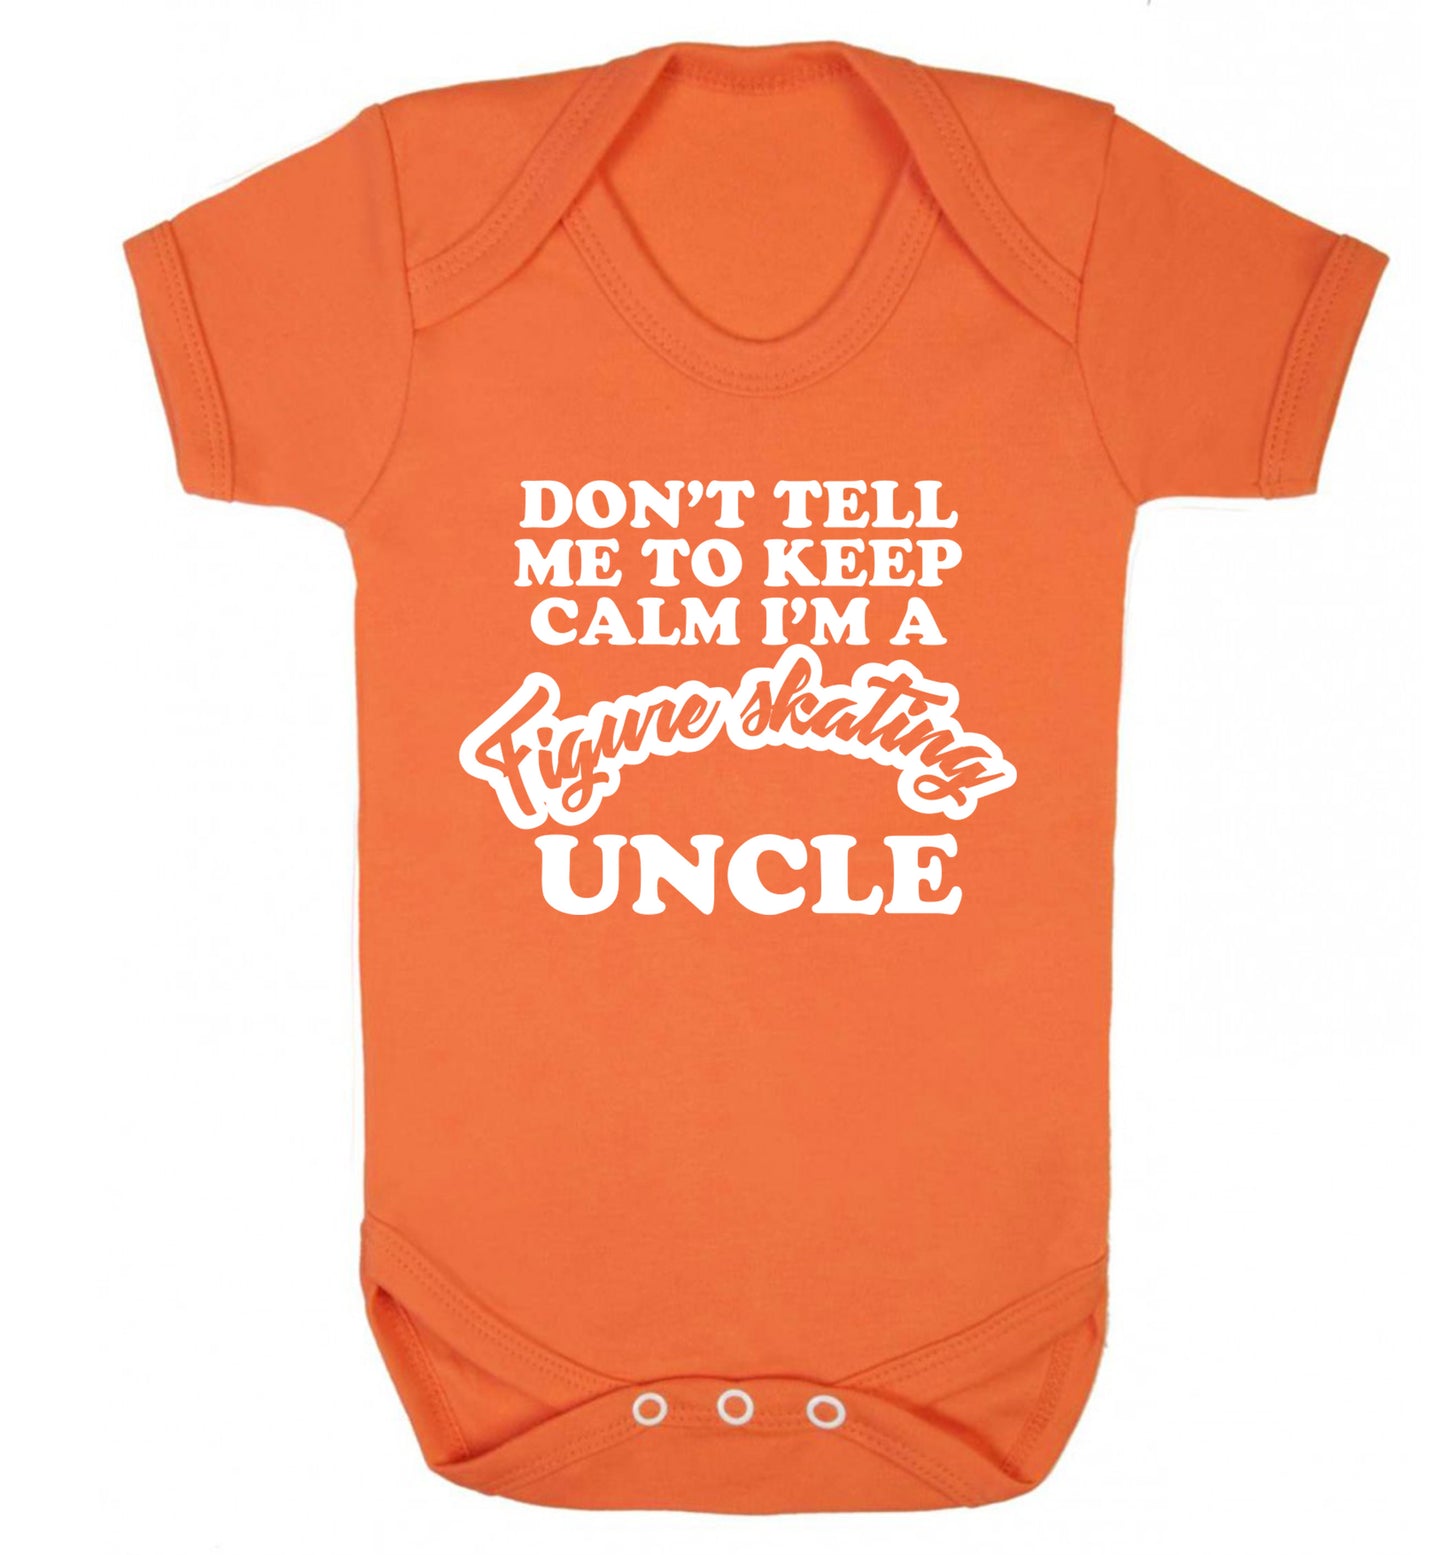 Don't tell me to keep calm I'm a figure skating uncle Baby Vest orange 18-24 months